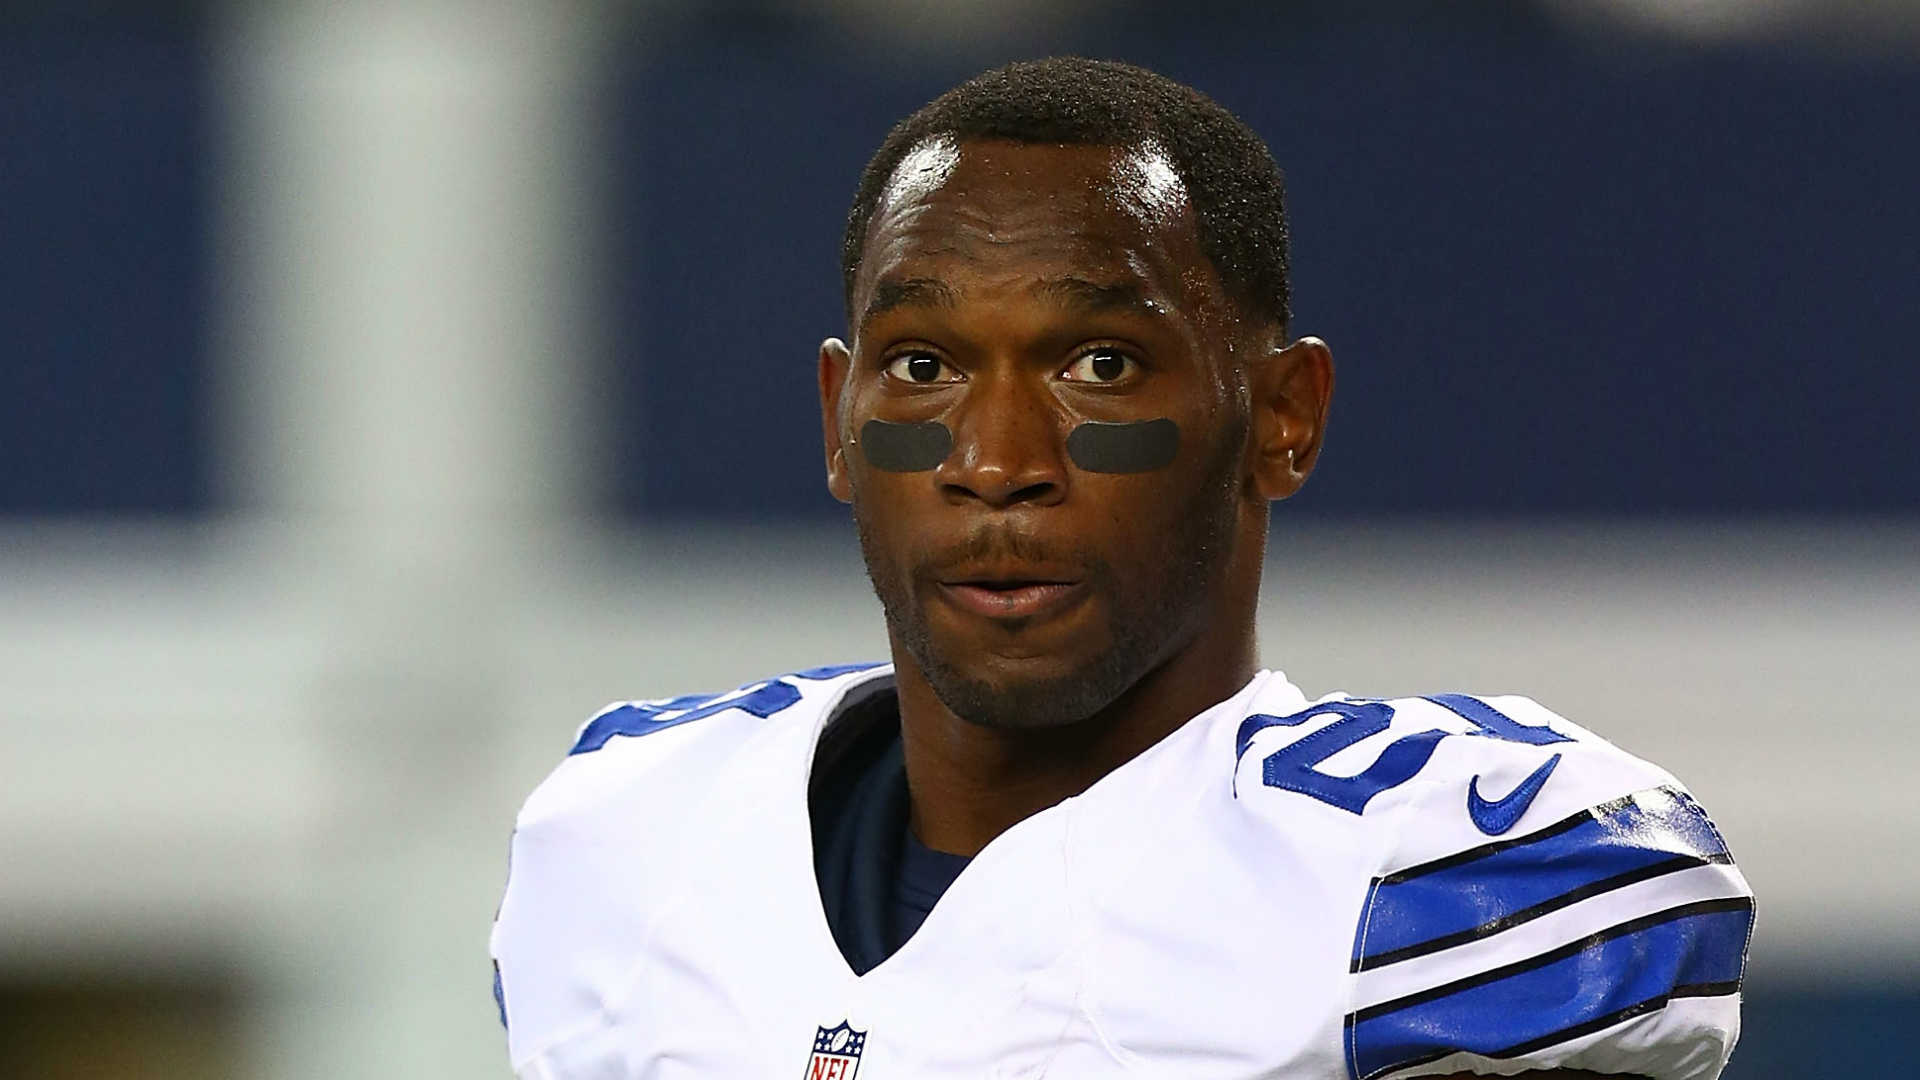 Report: Cowboys RB Joseph Randle arrested for shoplifting | NFL ...